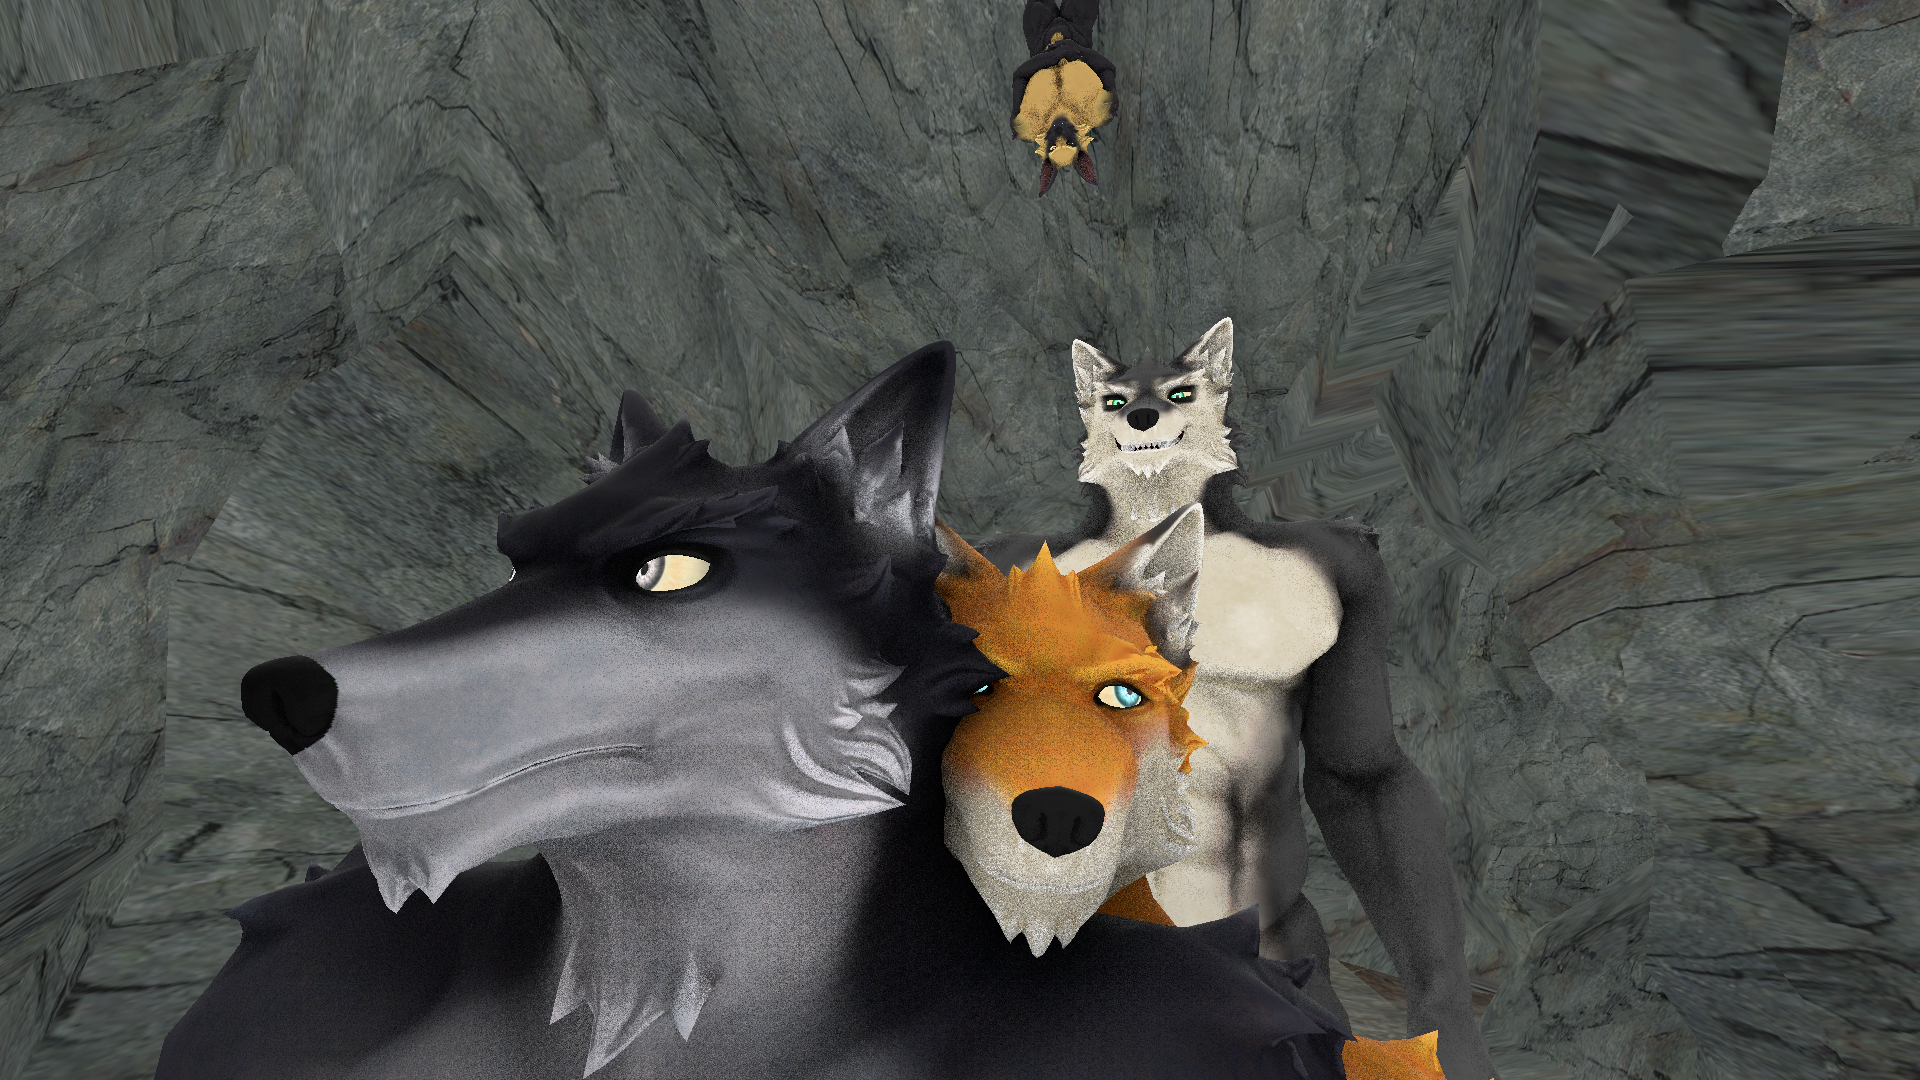 SFM:the fox and the wolf meet the bat and wolf part 1. 